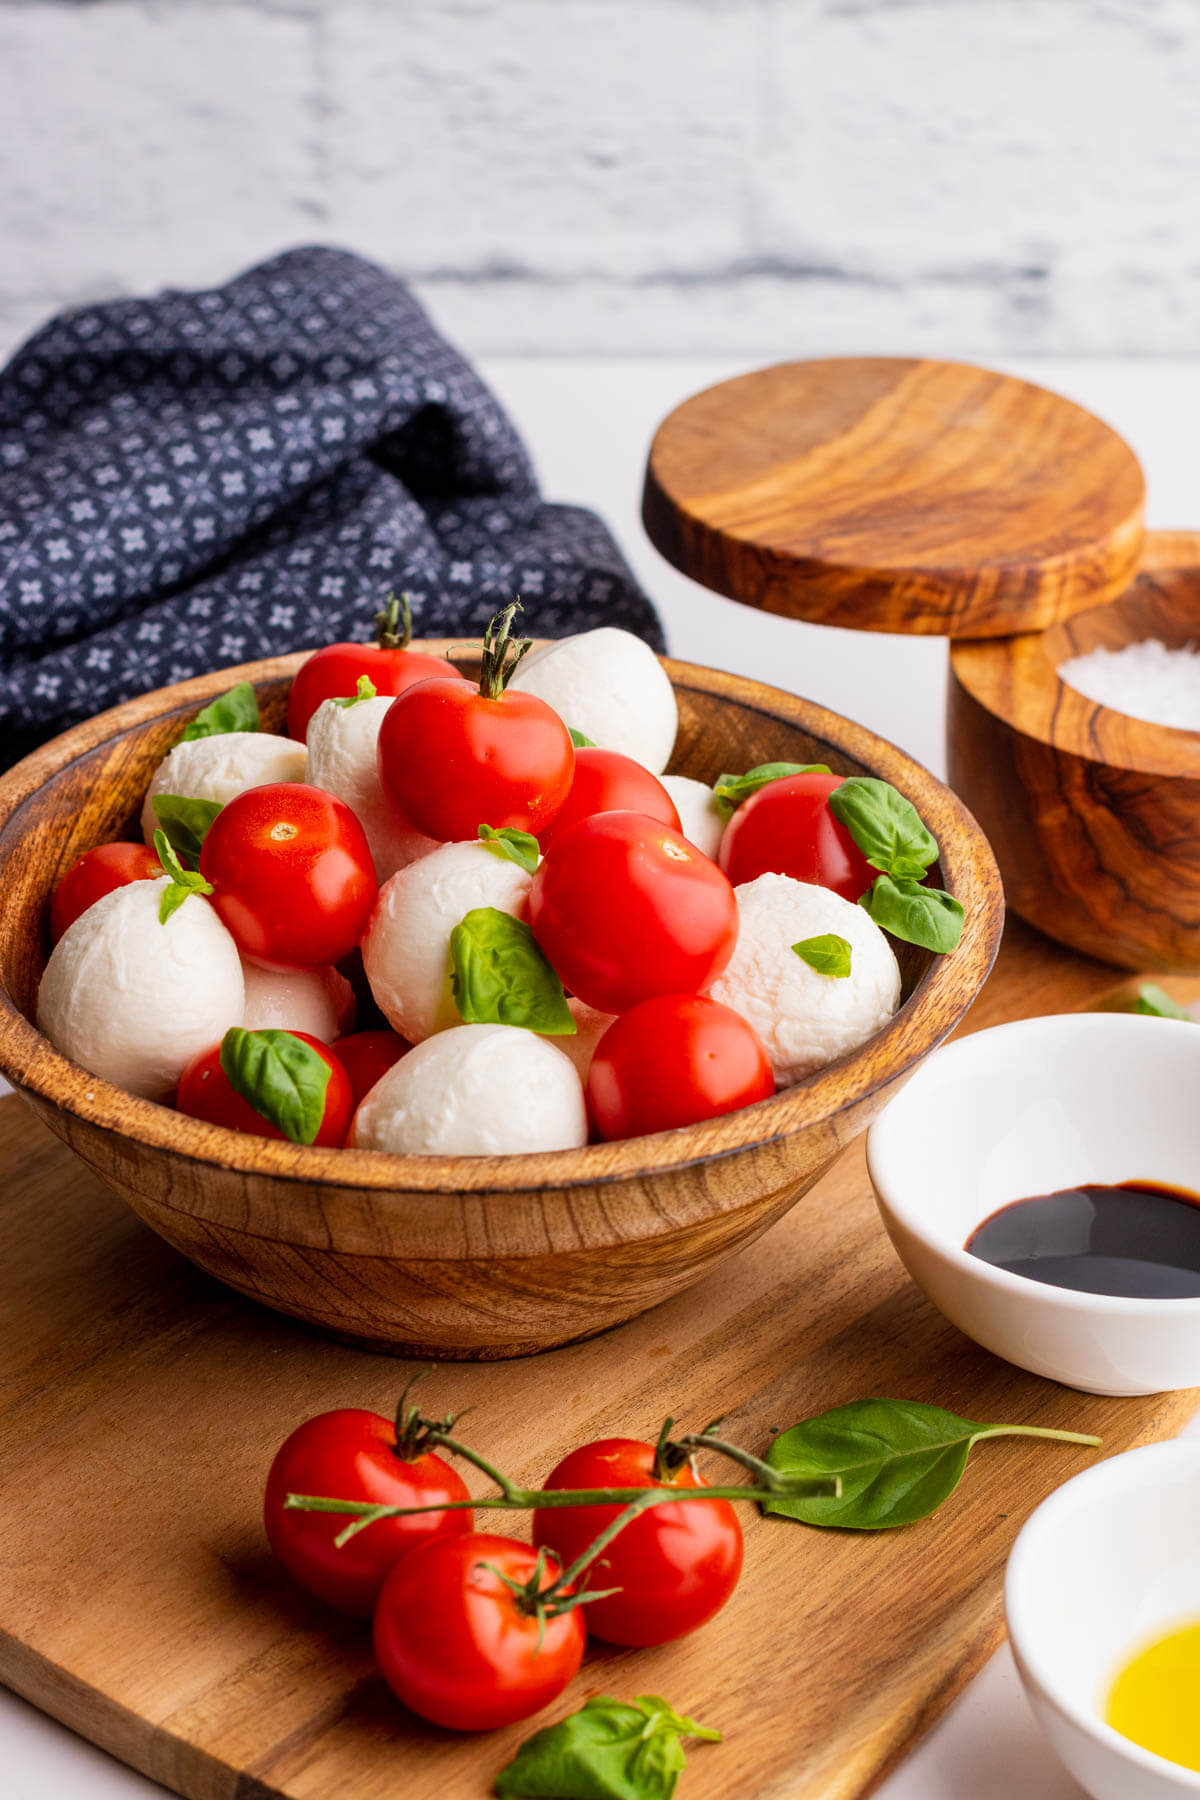 A wooden bowl filled with bright red cherry tomatoes, white mozzarella balls and green basil drizzled with olive oil and balsamic reduction.